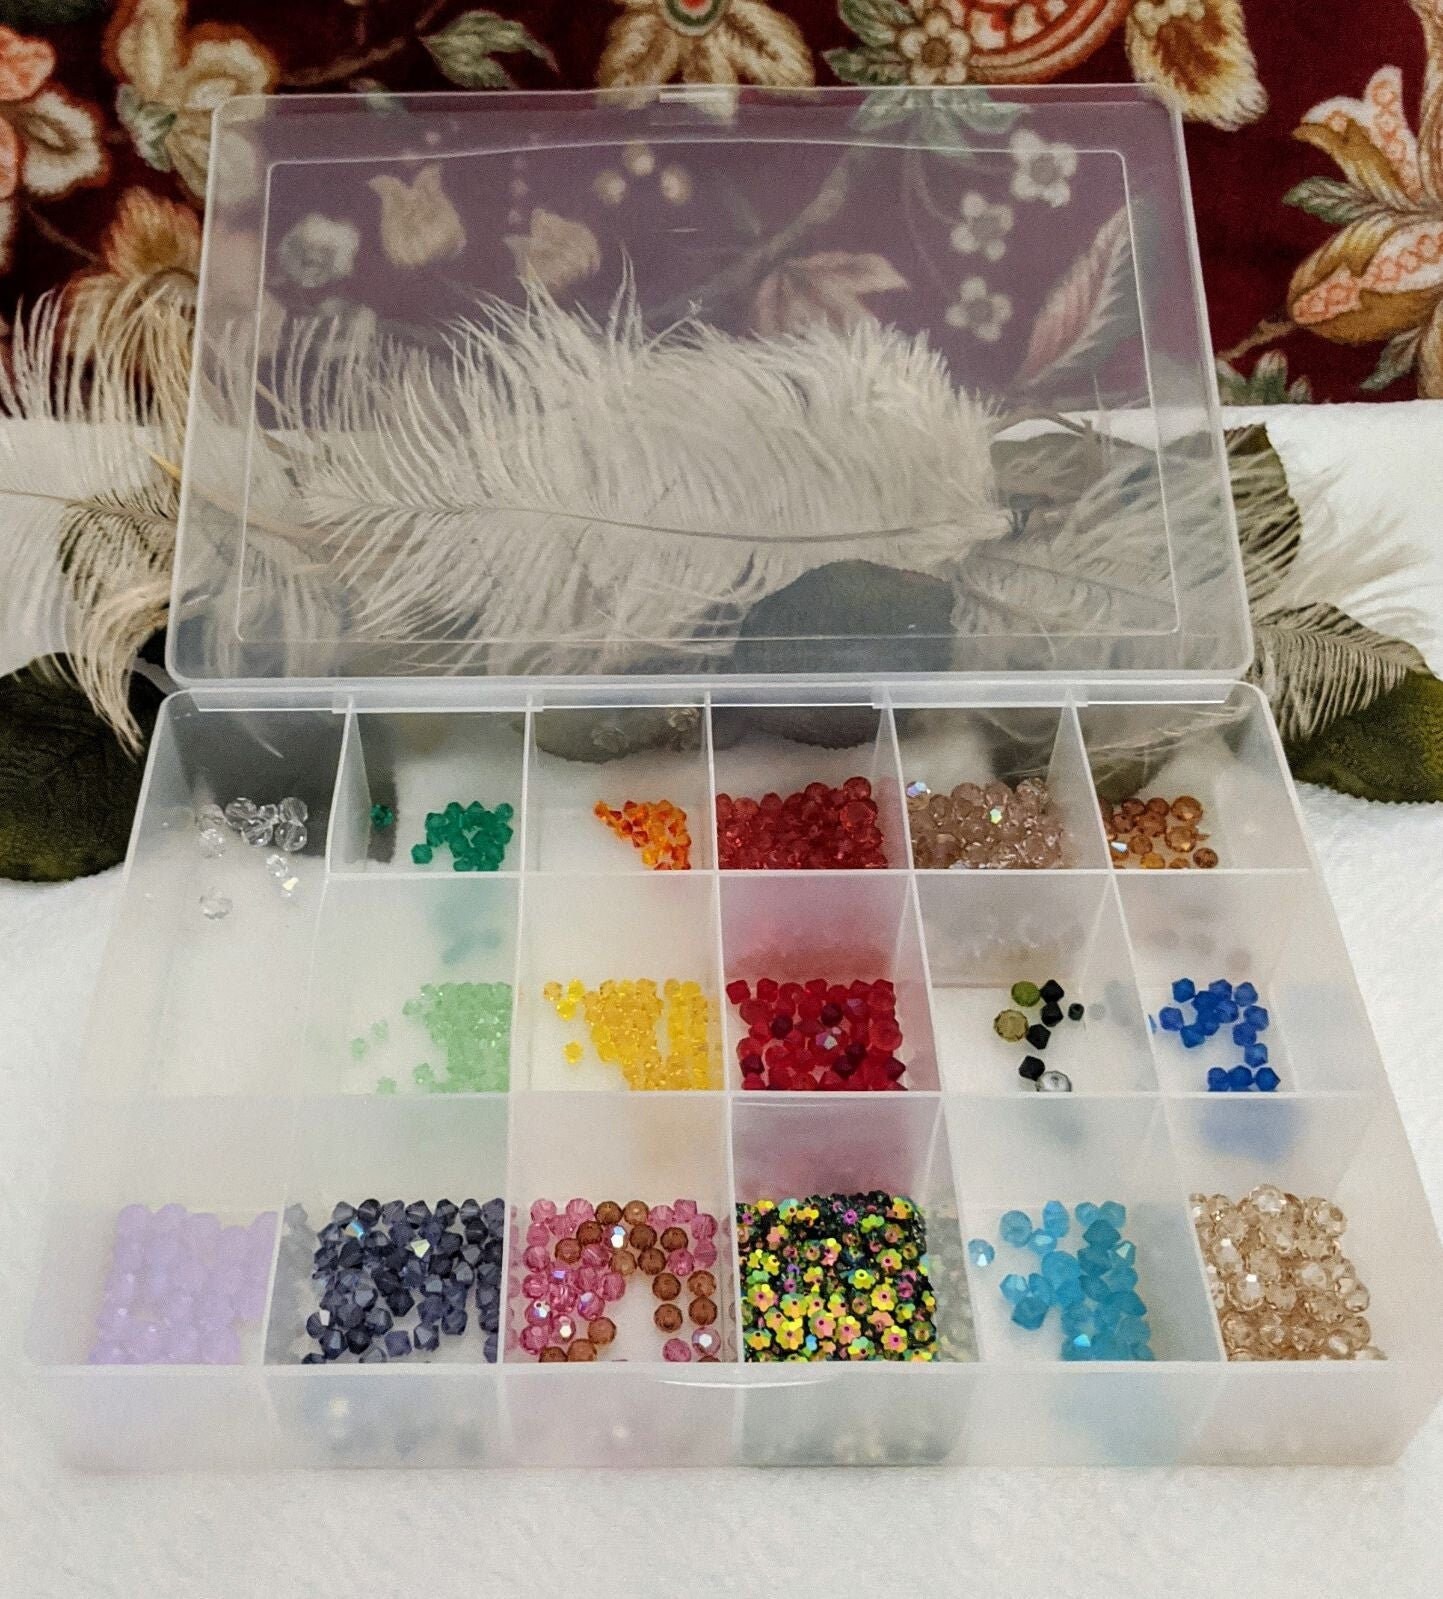 Assorted Colors Hicarer 72 Pieces Mixed Birthstone Charms Crystal Birthstone Charms DIY Beads Pendants with Rings for Making Jewelry Bracelets Earrings Necklace 